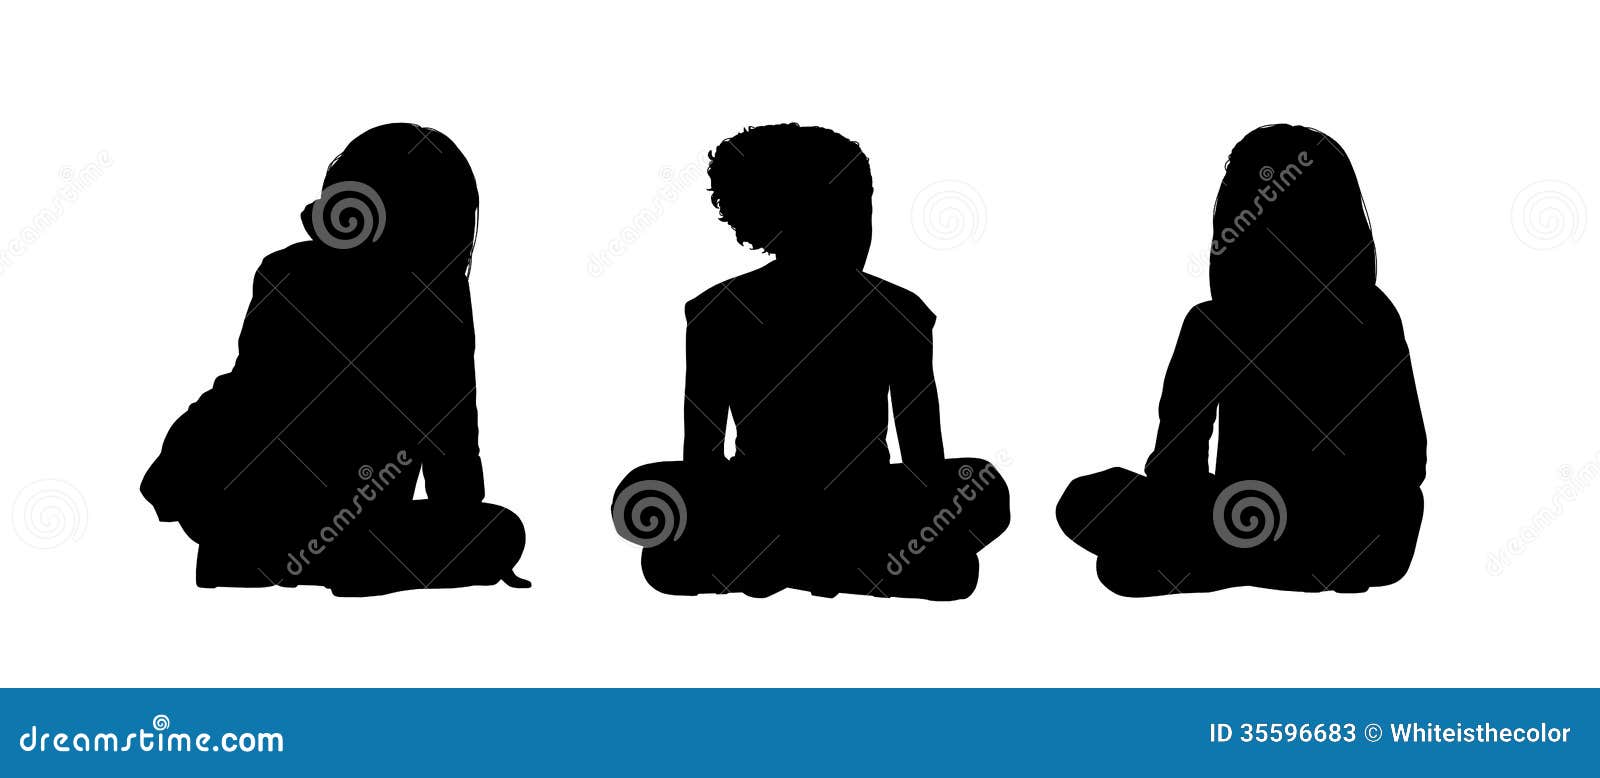 little girls seated silhouettes set 2